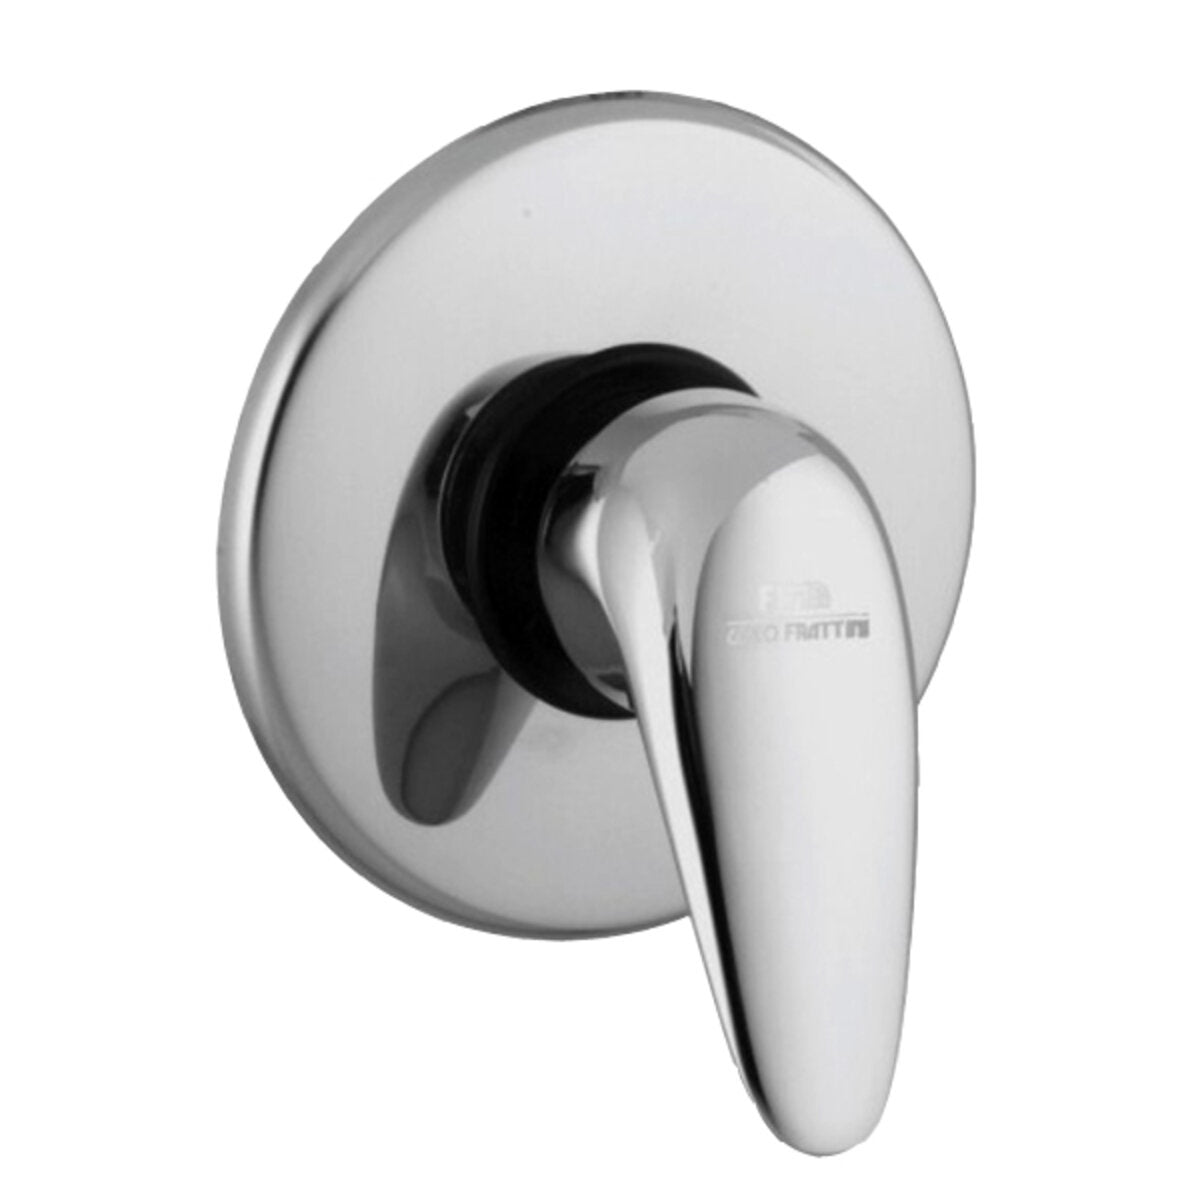 Fima Carlo Frattini series 18 built-in shower mixer without diverter